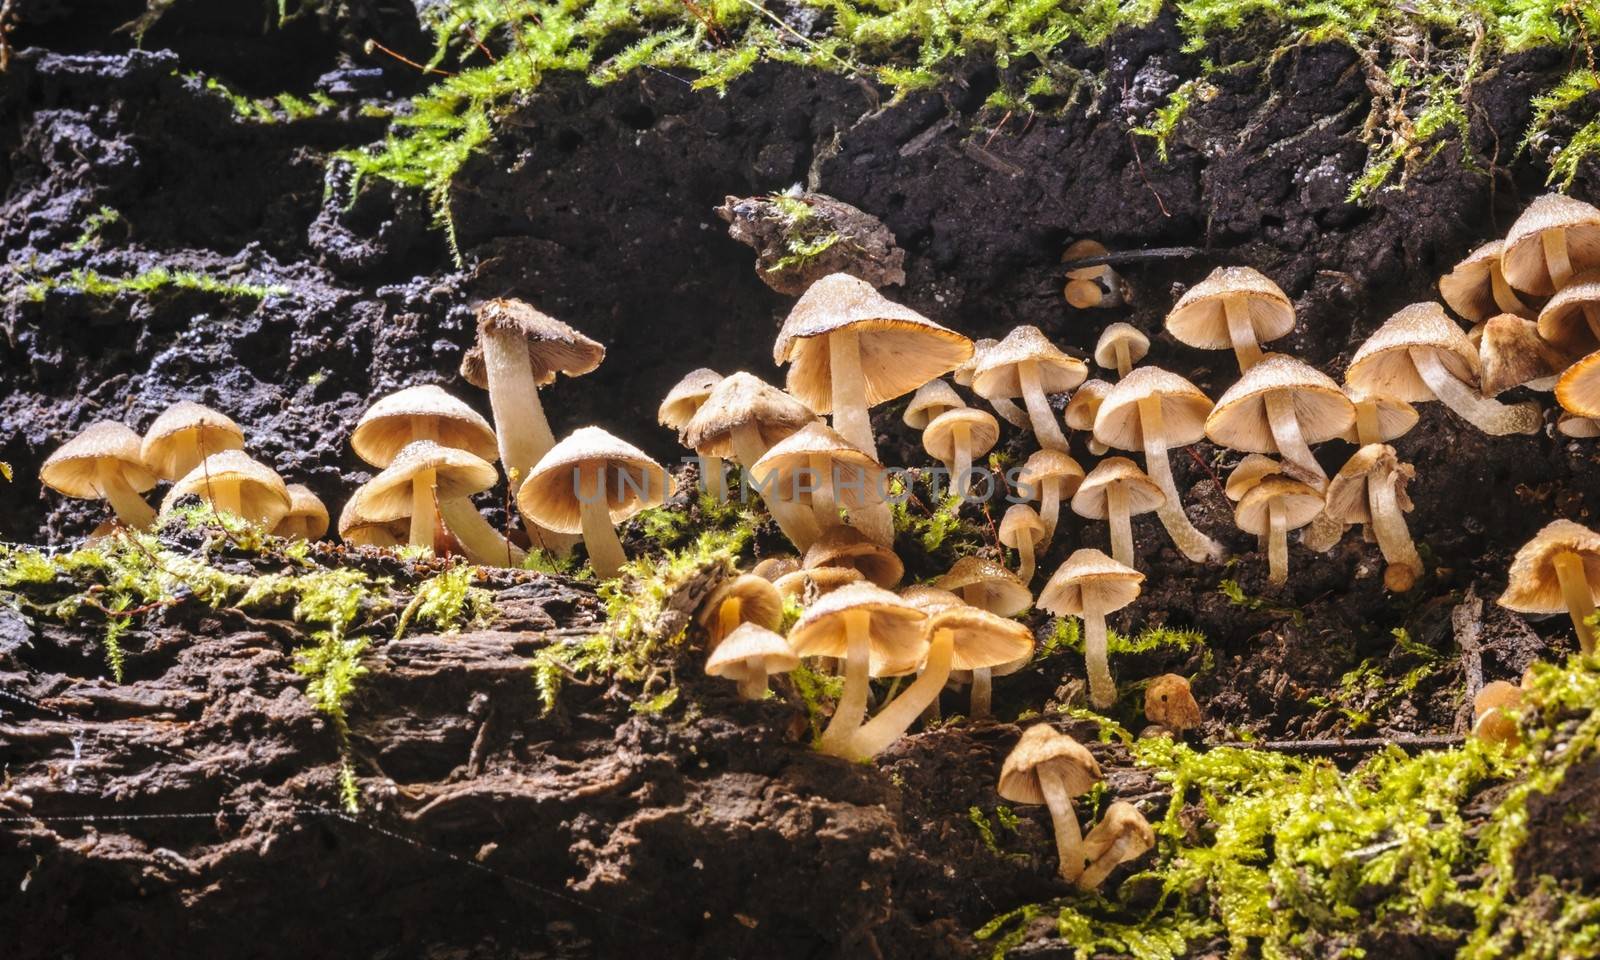 Small mushrooms in rain forest. by ngungfoto